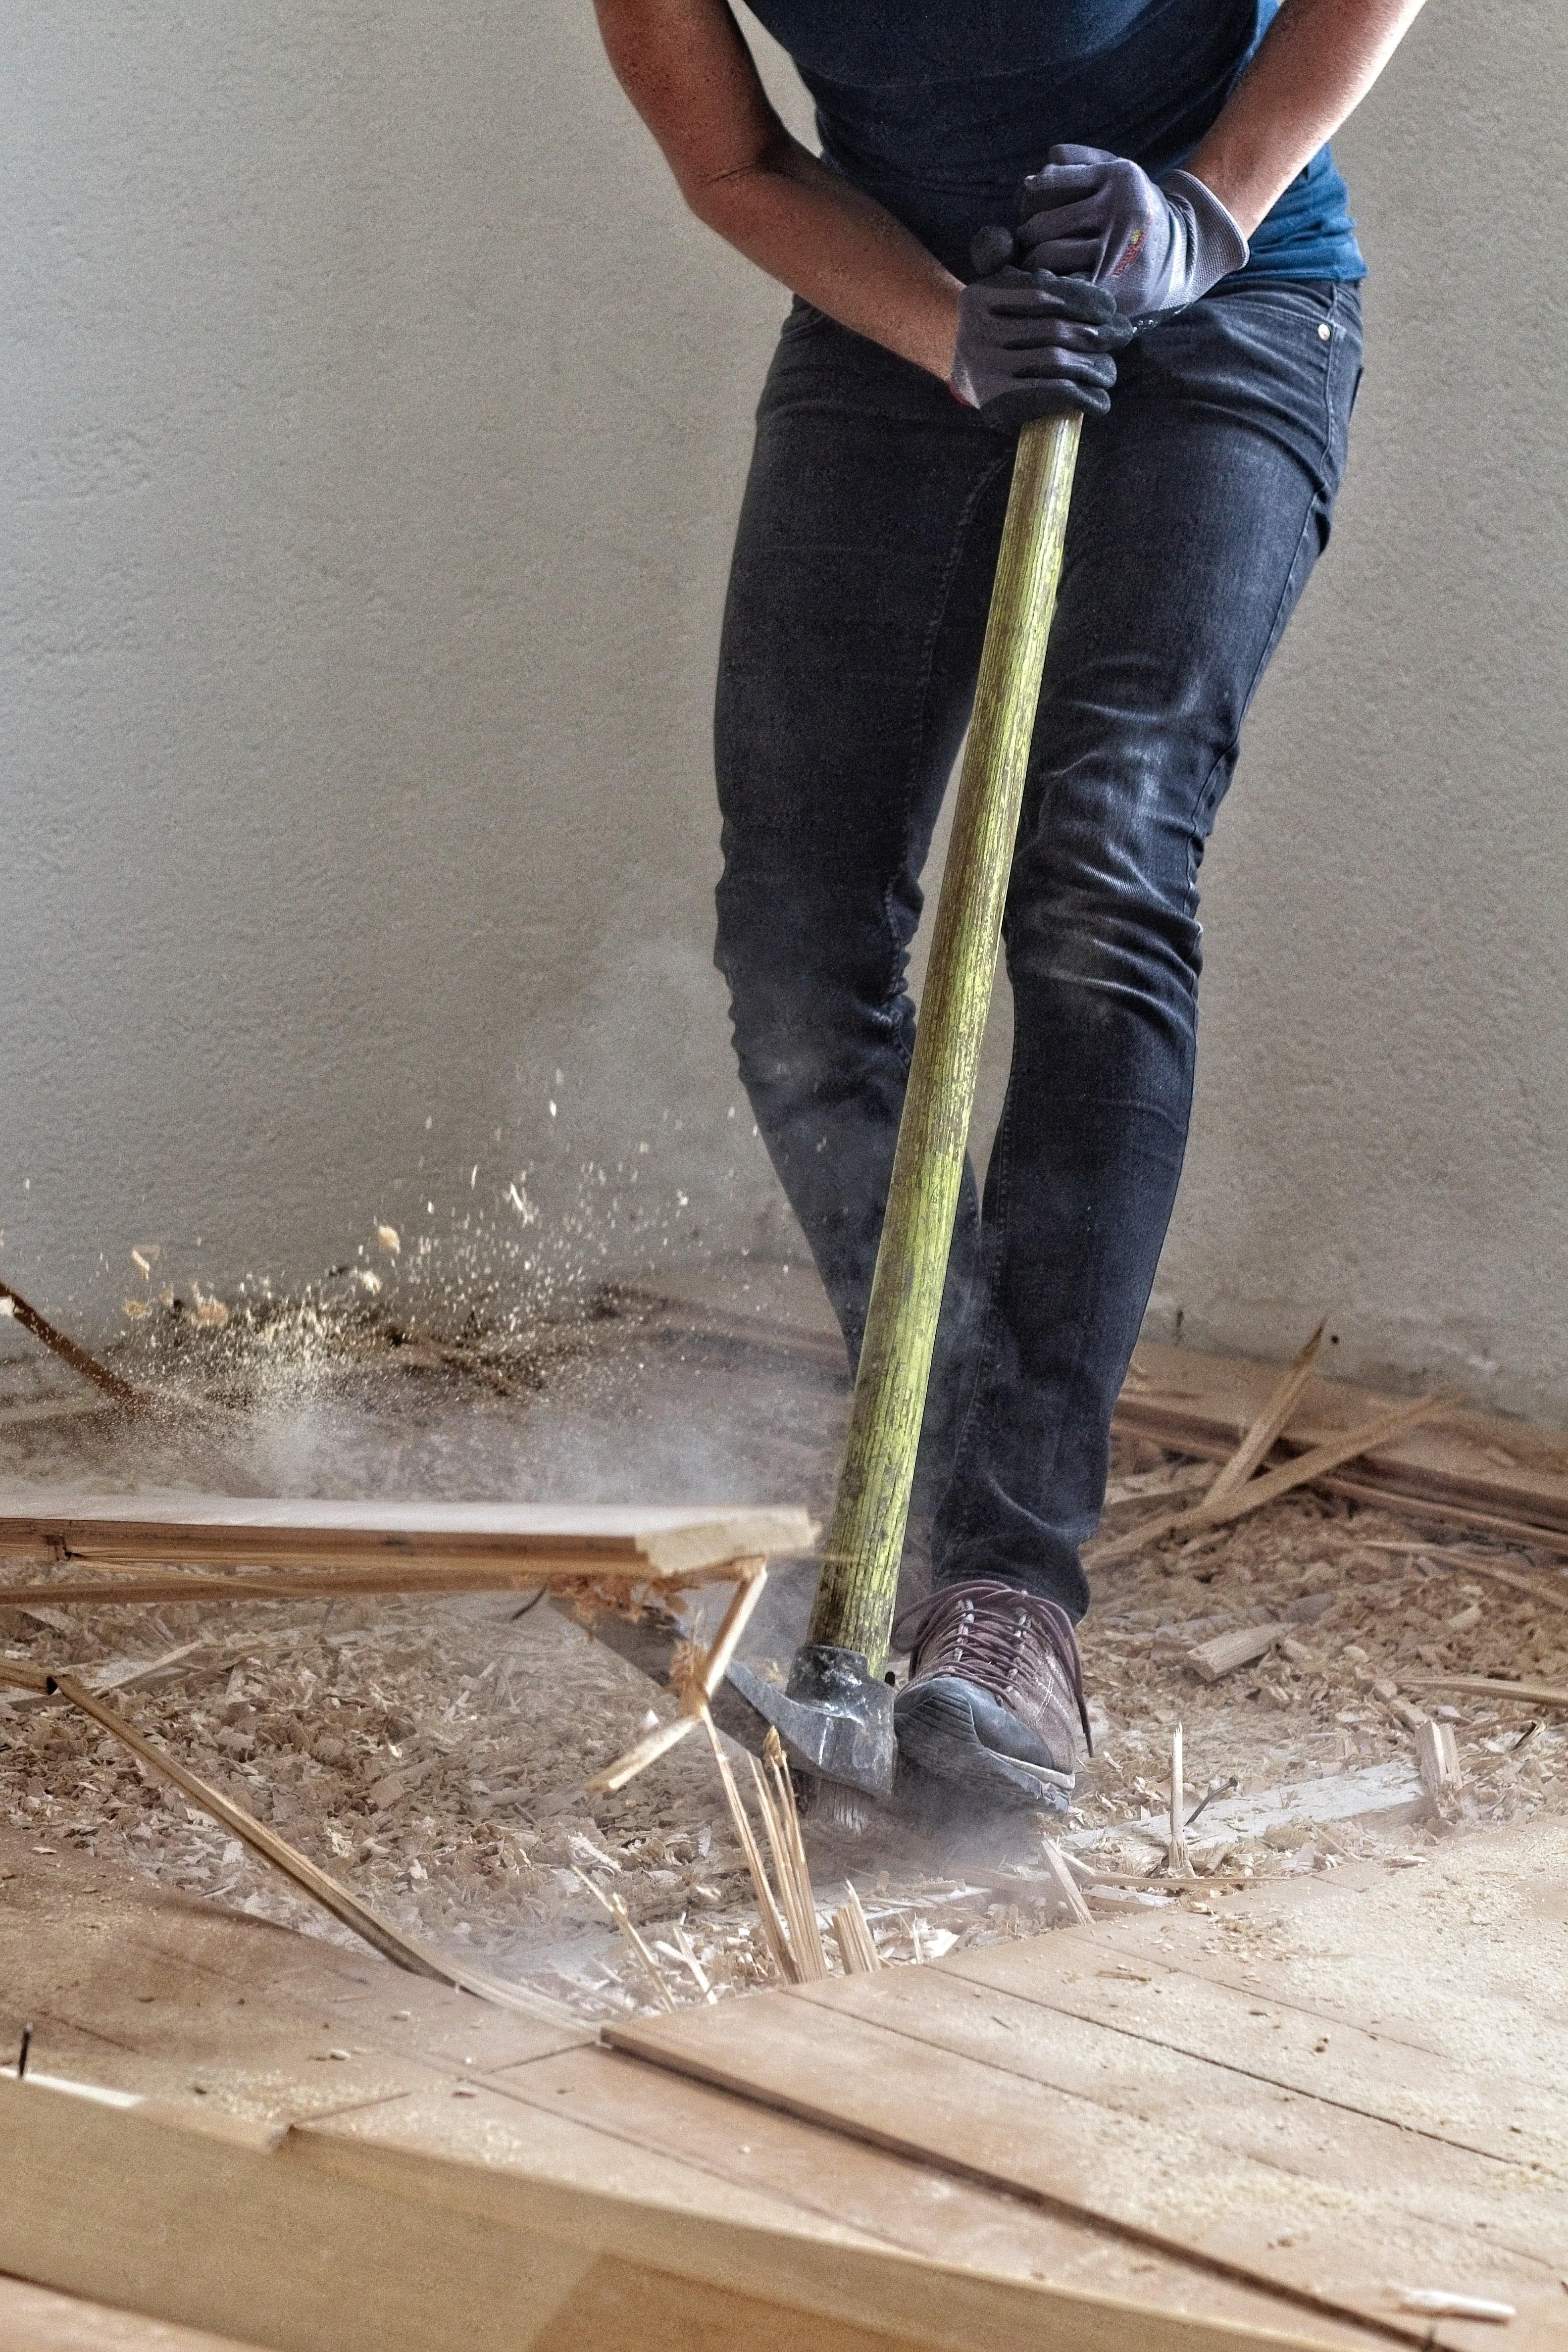 A contractor from the waist down, wearing gloves, prying up old flooring with a pickaxe